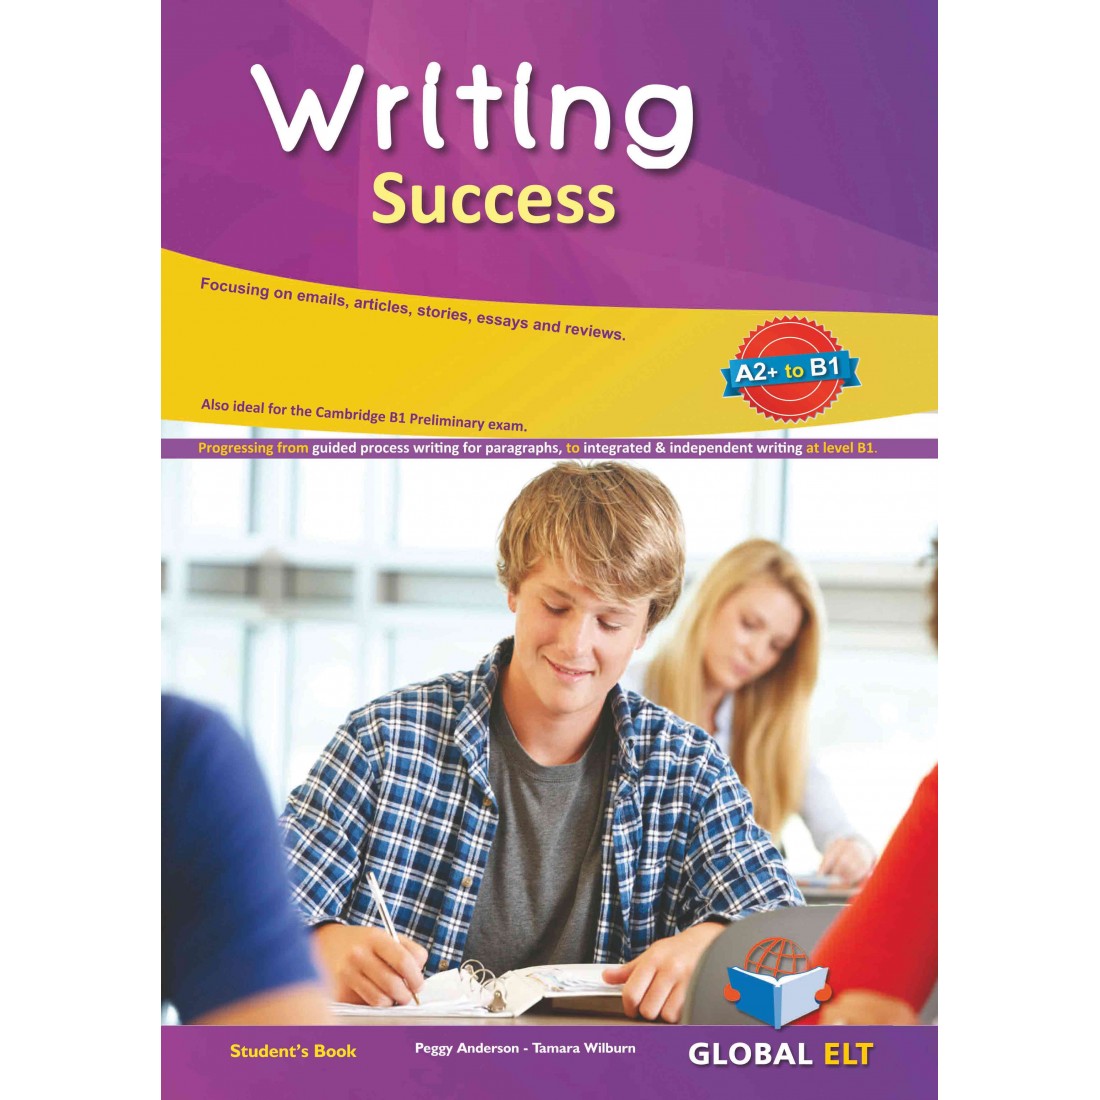 Optimise students book. Student's book a2+. CPE Practice Tests 4. Think b1 student's book 2. B1 Business English student book.